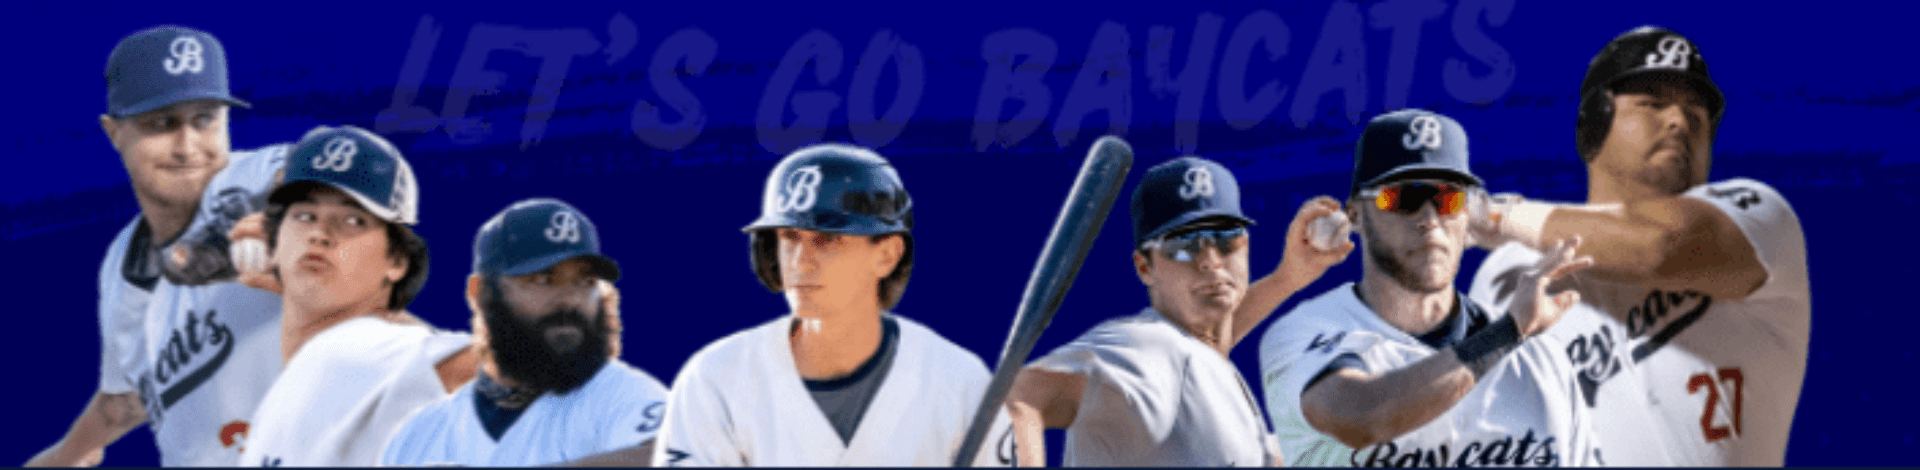 Cropped Barrie Baycats Banner